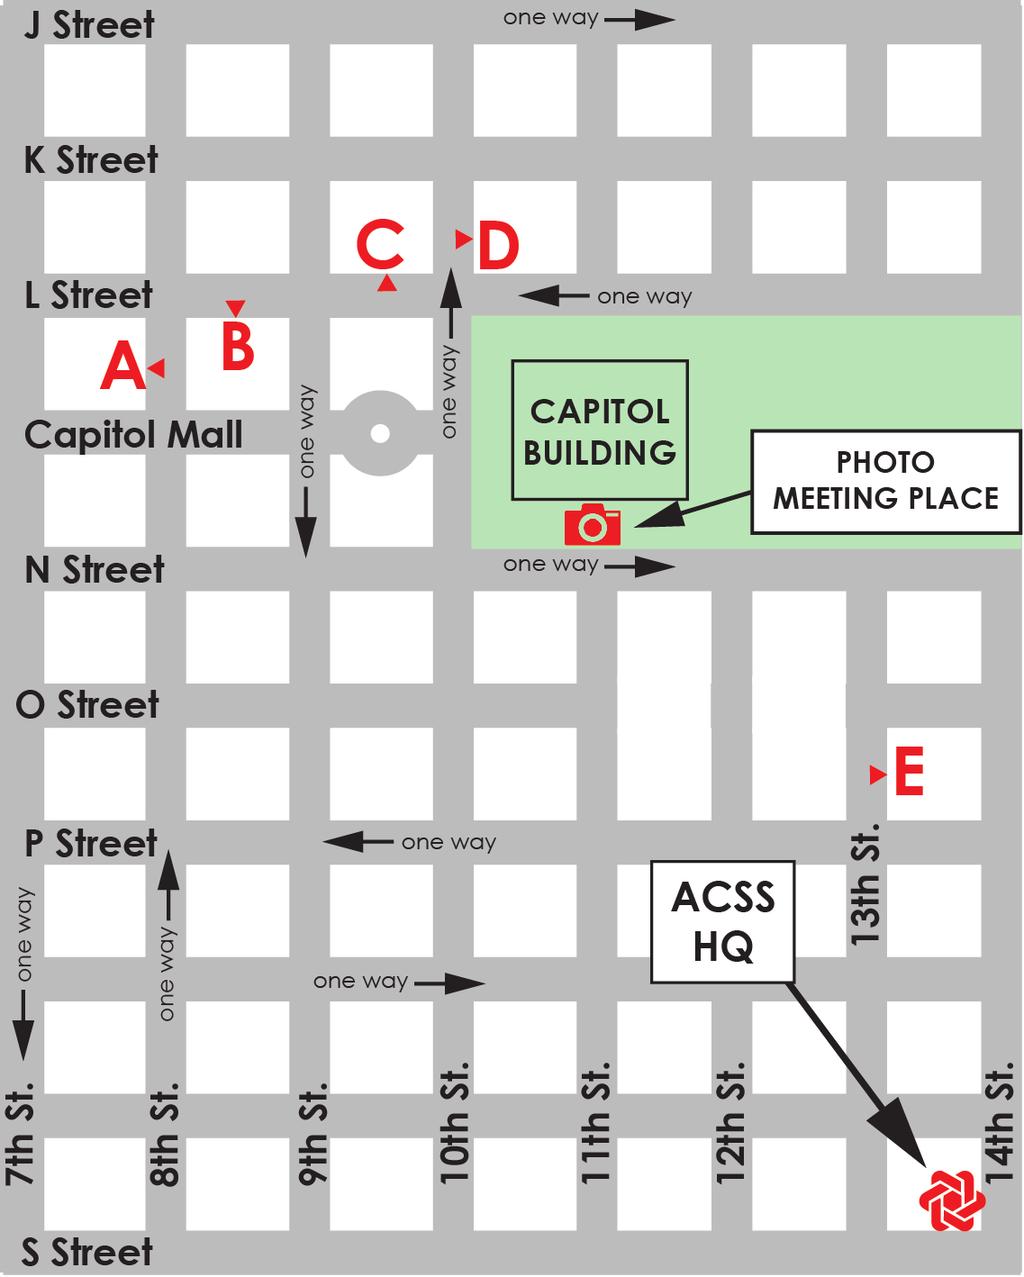 LOBBY DAY PARKING Parking lots in the Downtown area that are closest and with easiest access to the Capitol: A. SP Plus Parking 770 L St. $12/day early bird. $2 for every 1/3 hour. $20 max. B.